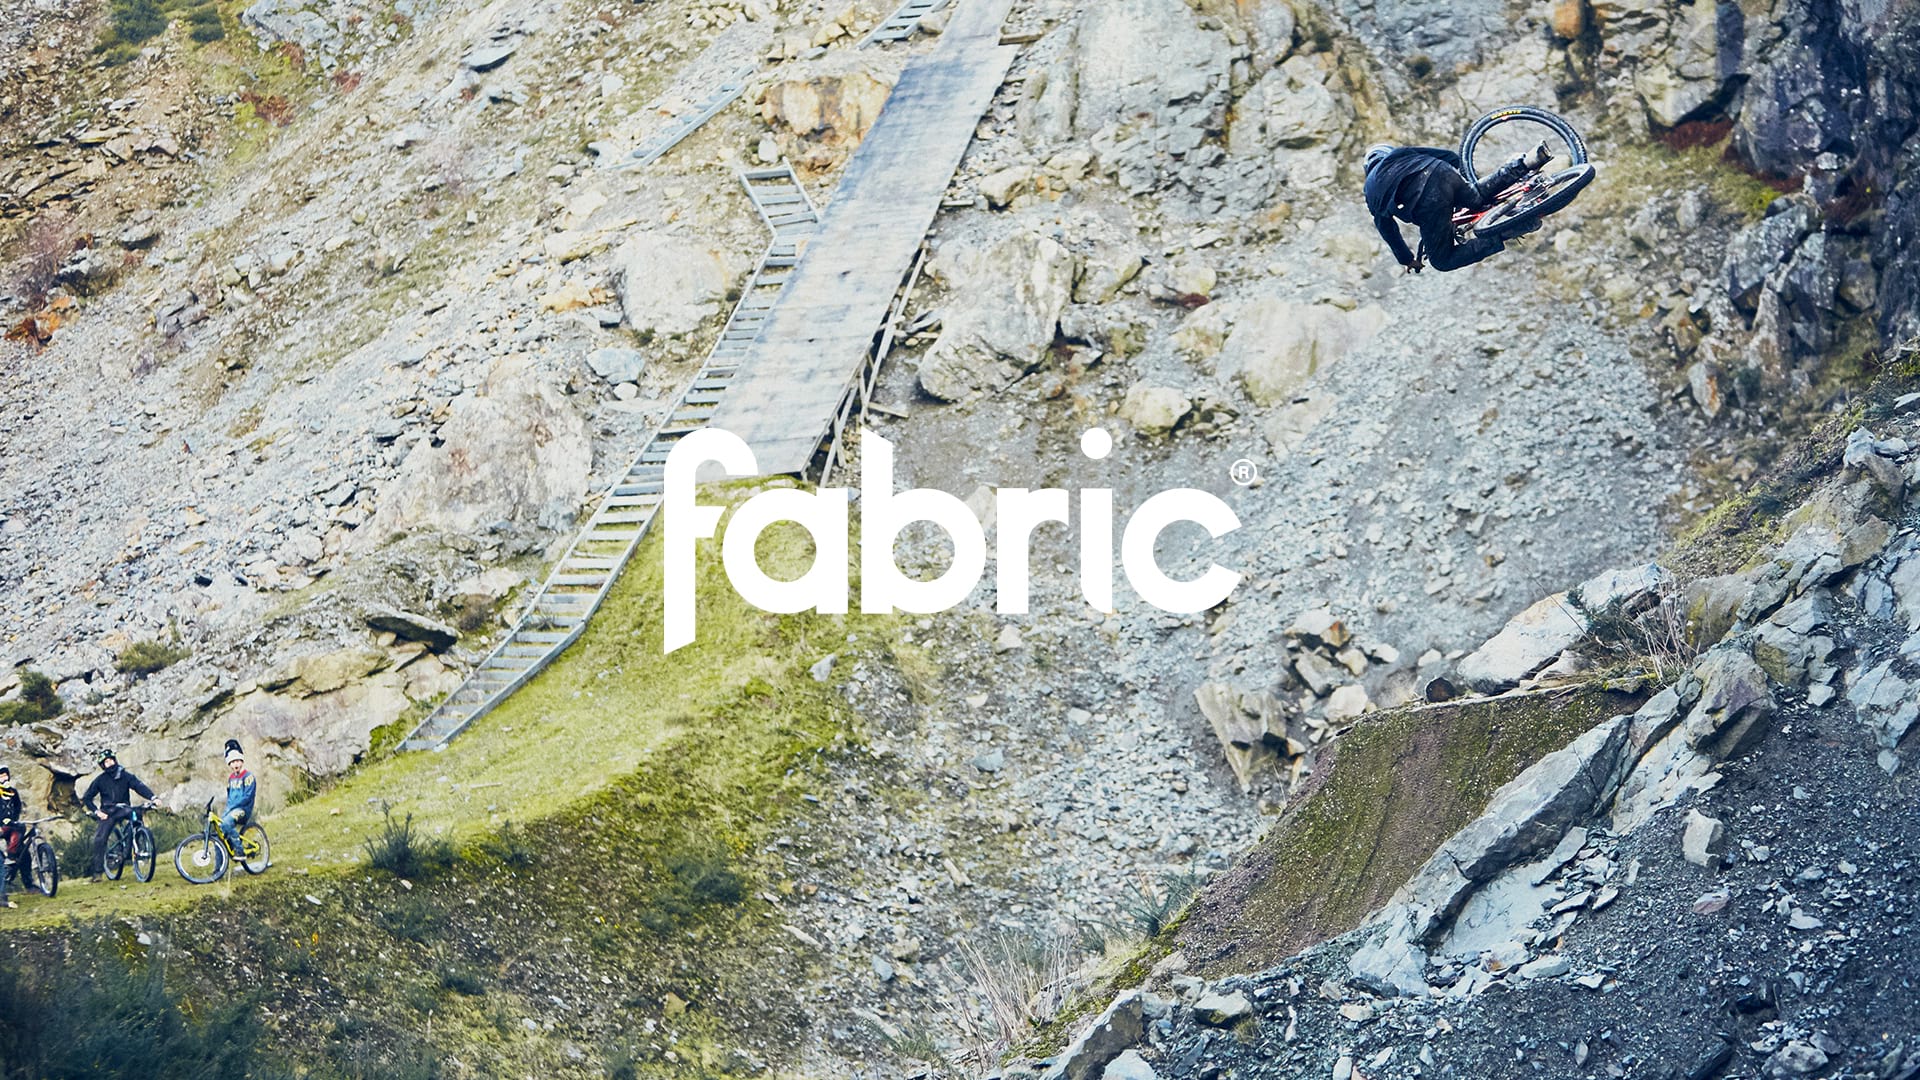 Video: Fabric x 50to01 at Revolution Bike Park